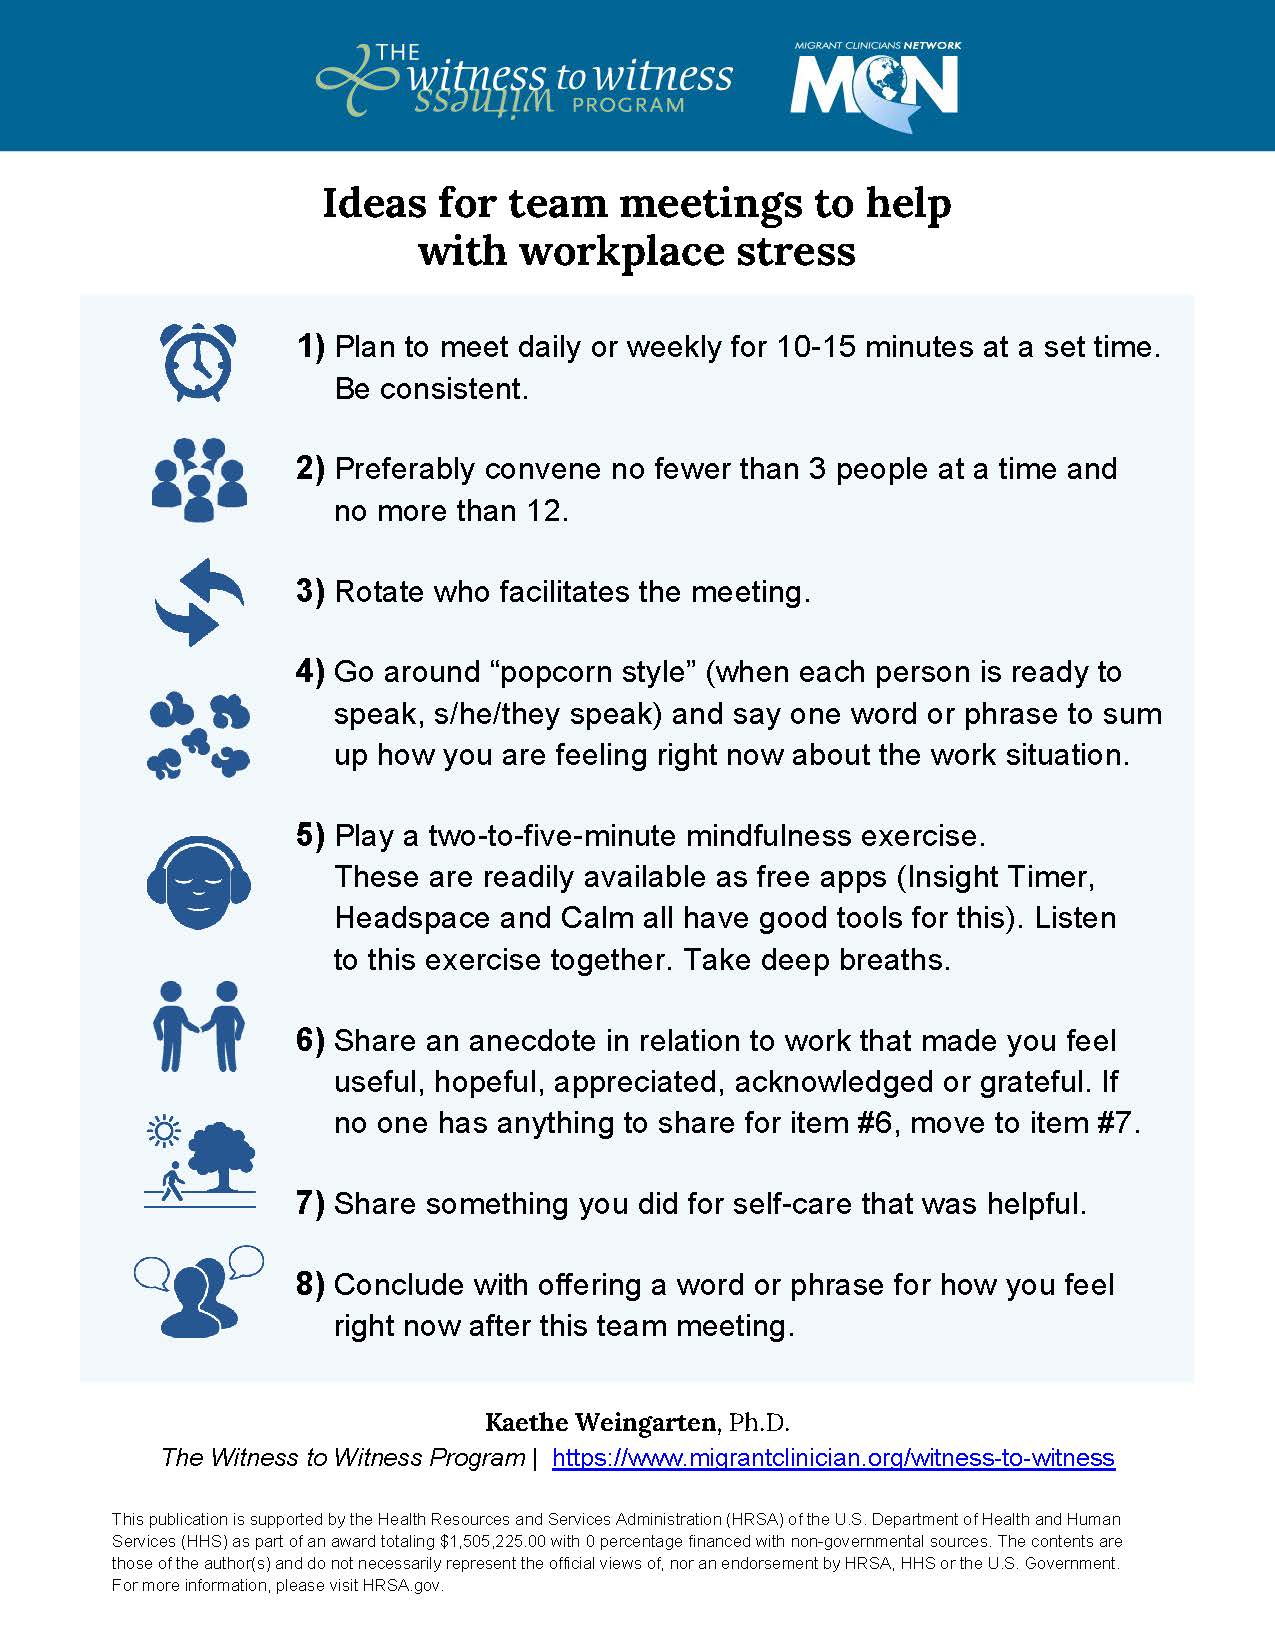 Ideas for team meetings to help with workplace stress